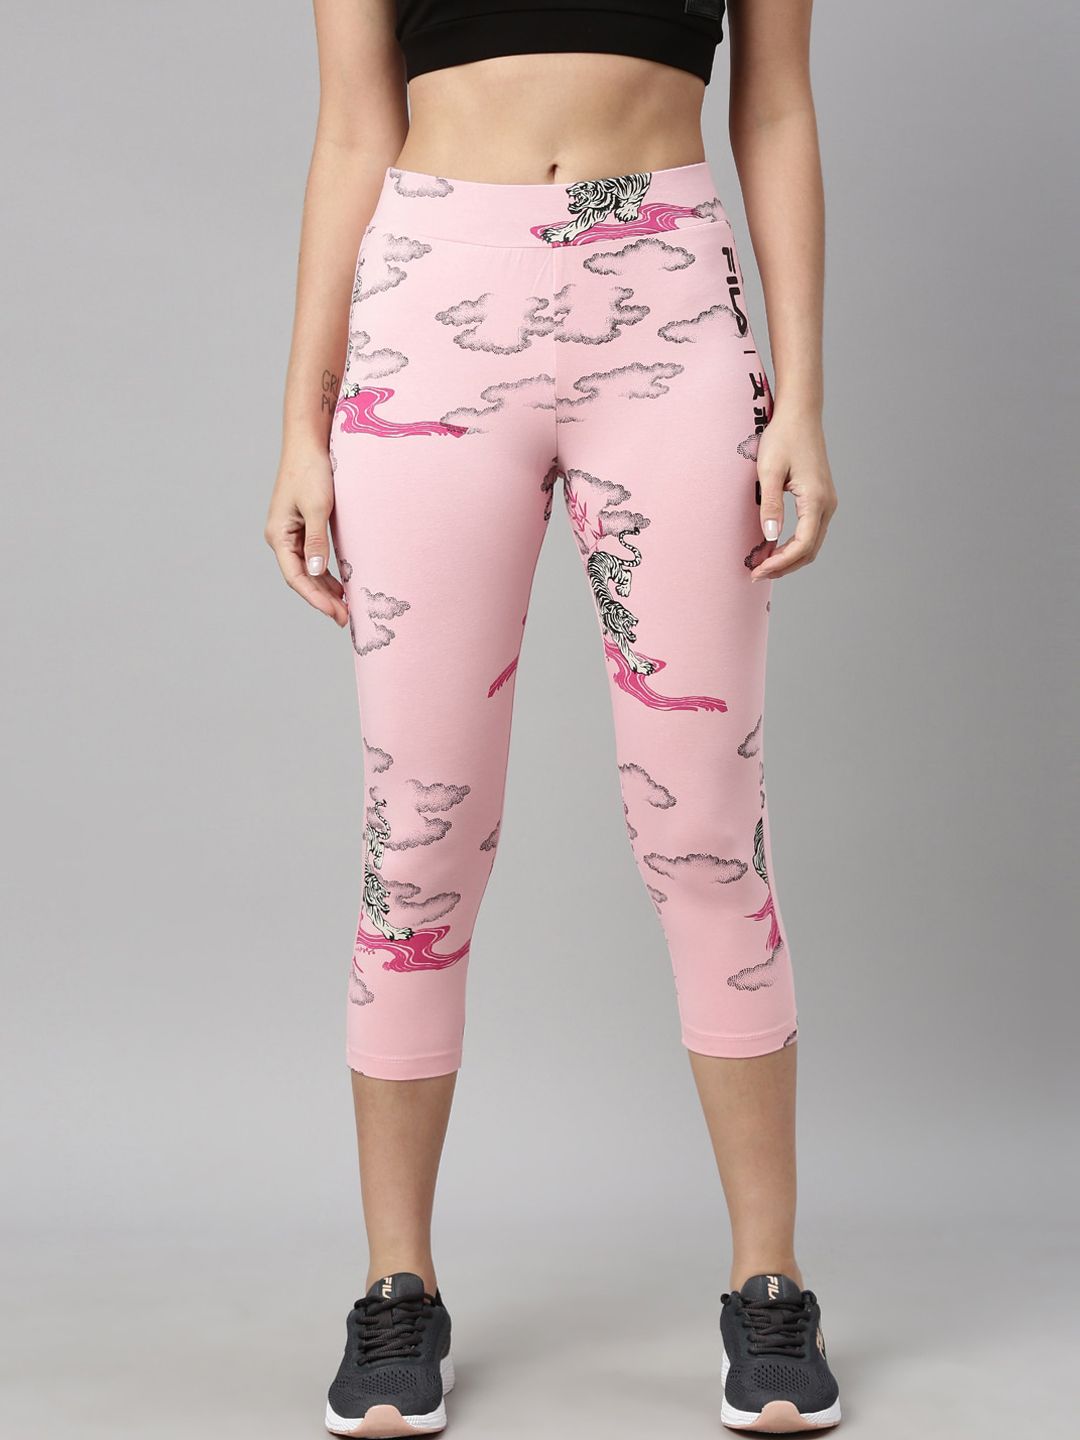 FILA Women Pink Printed Tights Price in India